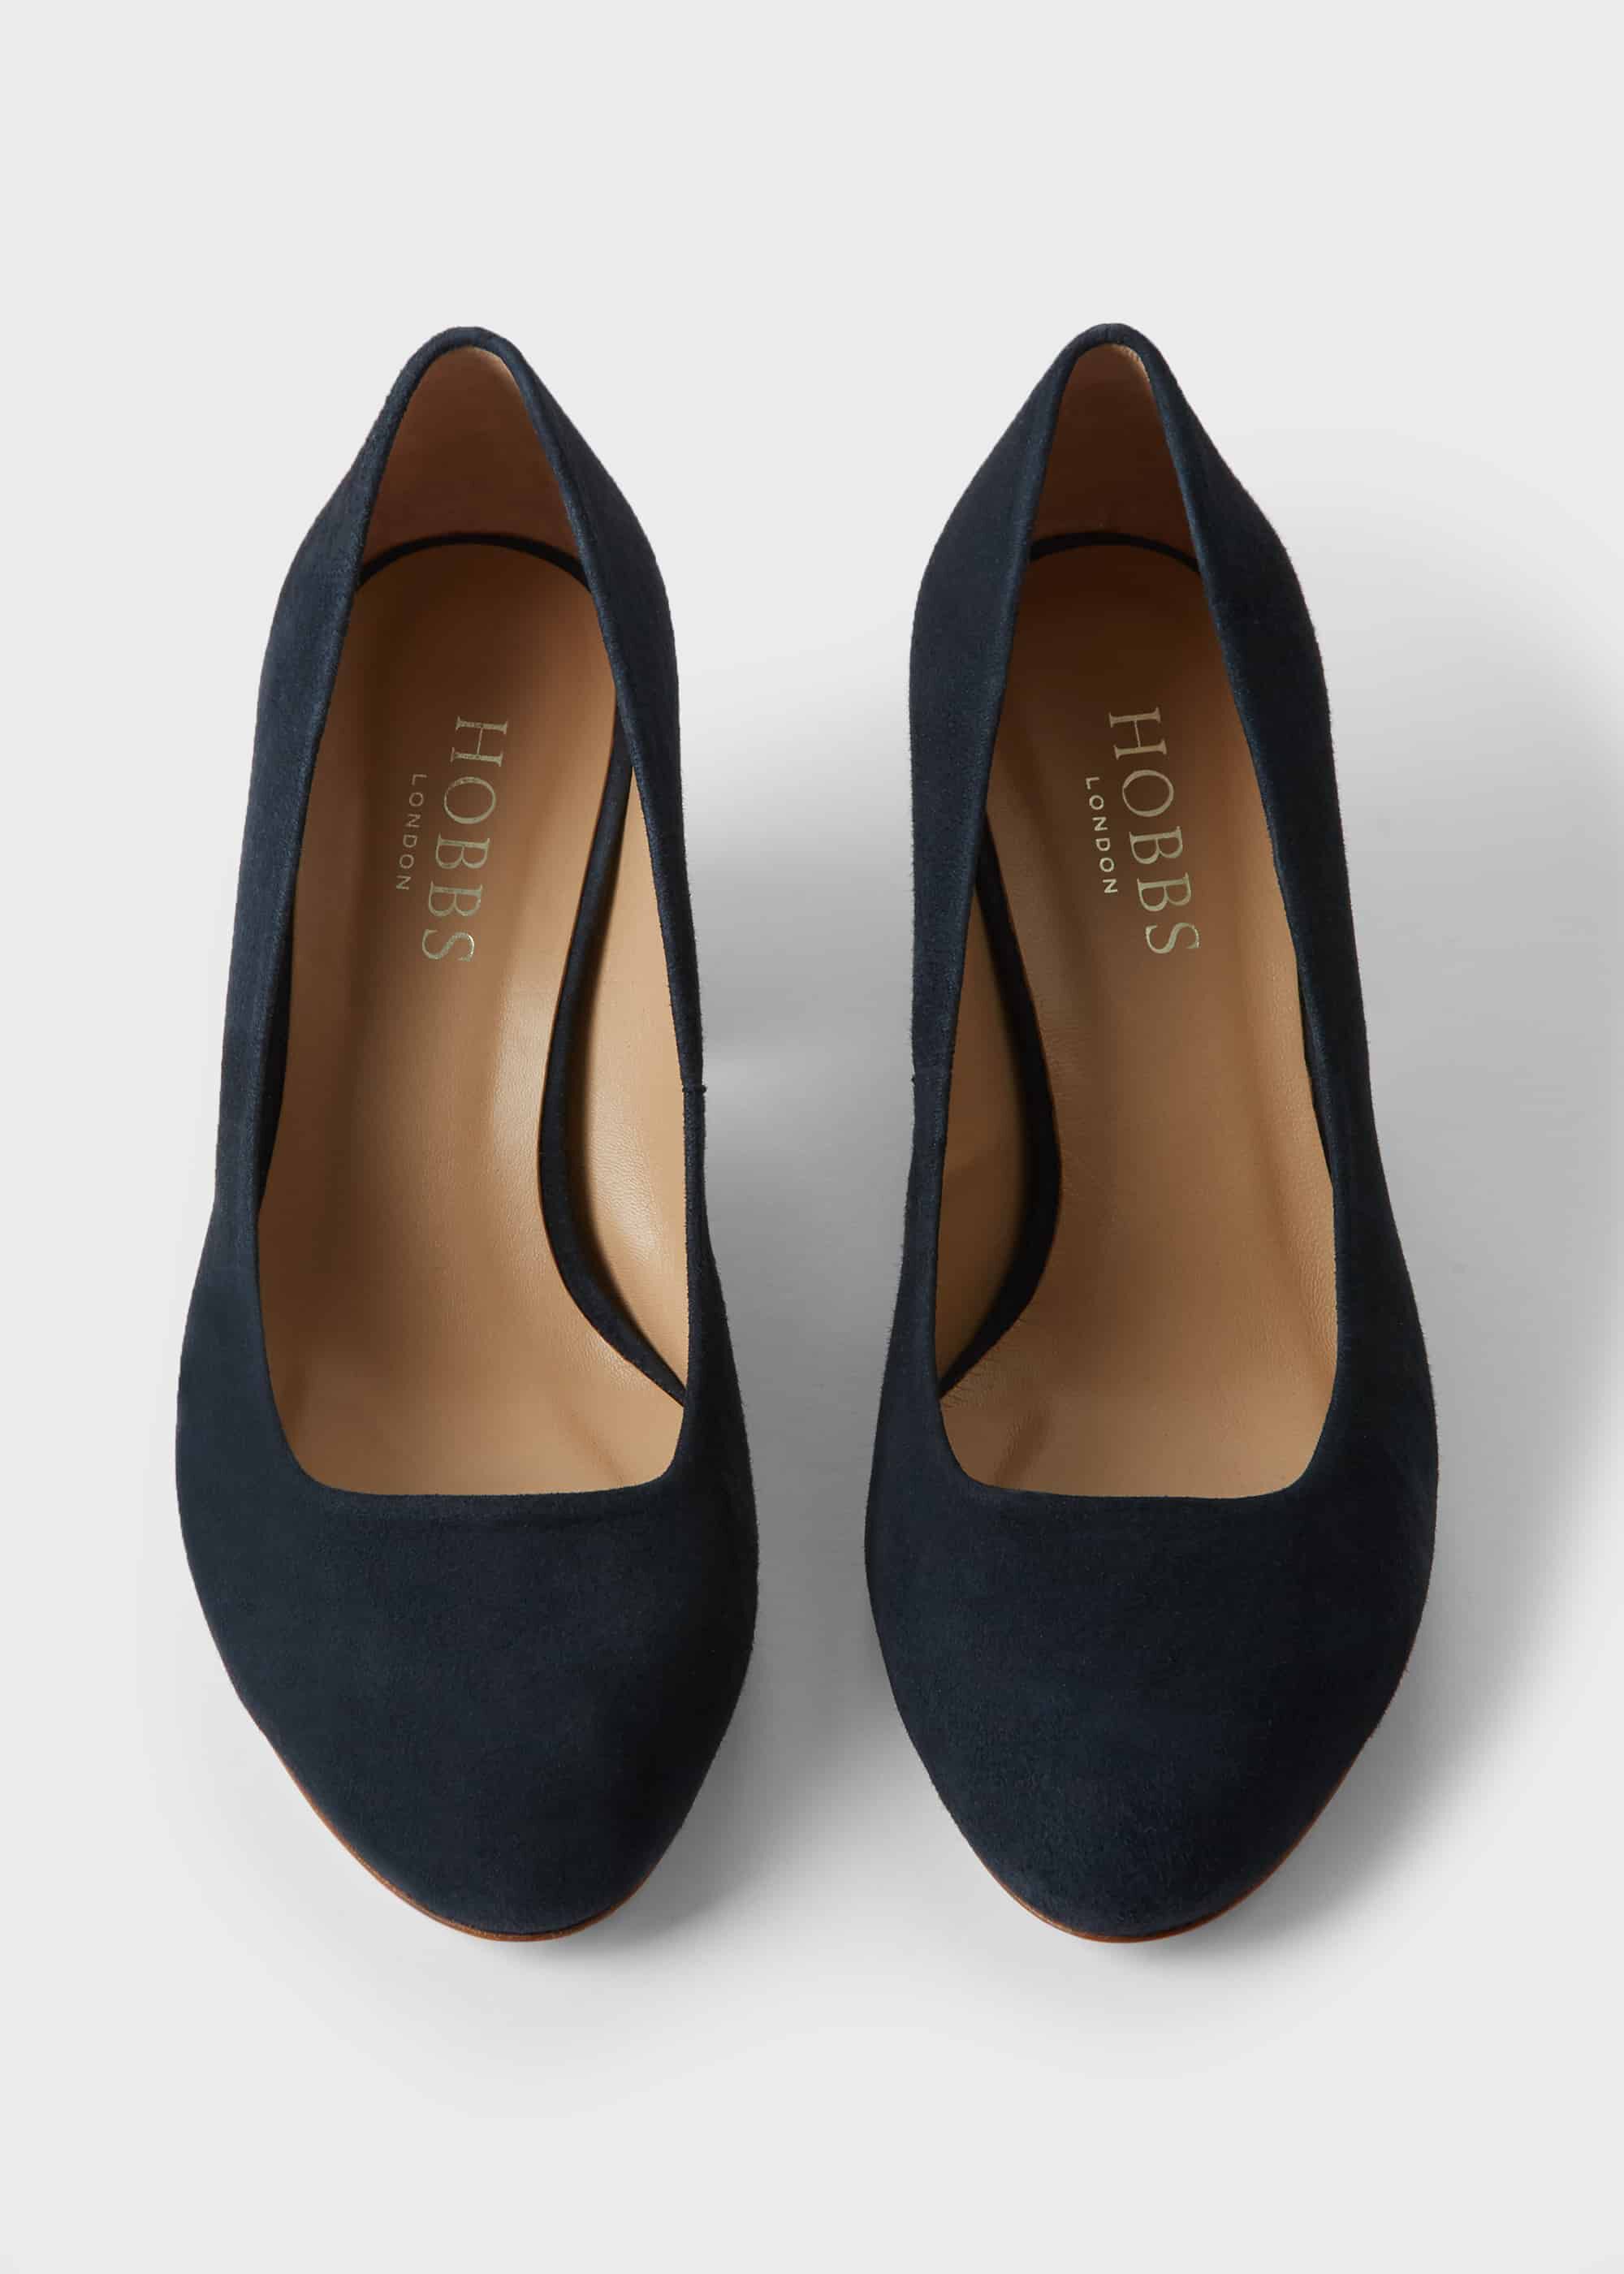 navy suede court shoes wide fit